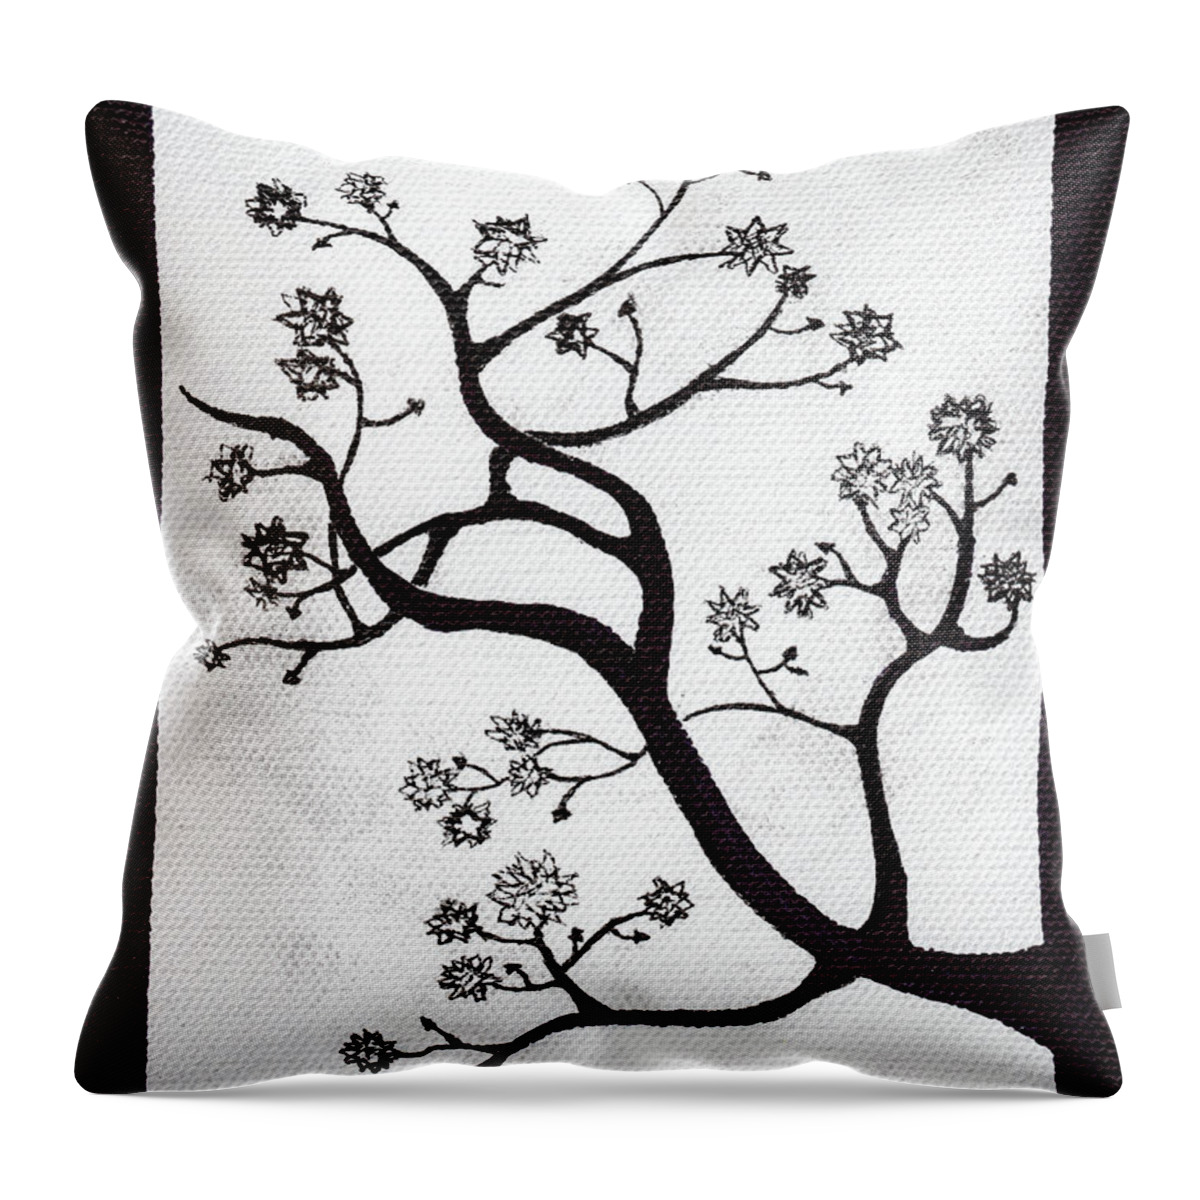 Abstract Throw Pillow featuring the drawing Zen Sumi Bush Black Ink on White Canvas by Ricardos by Ricardos Creations